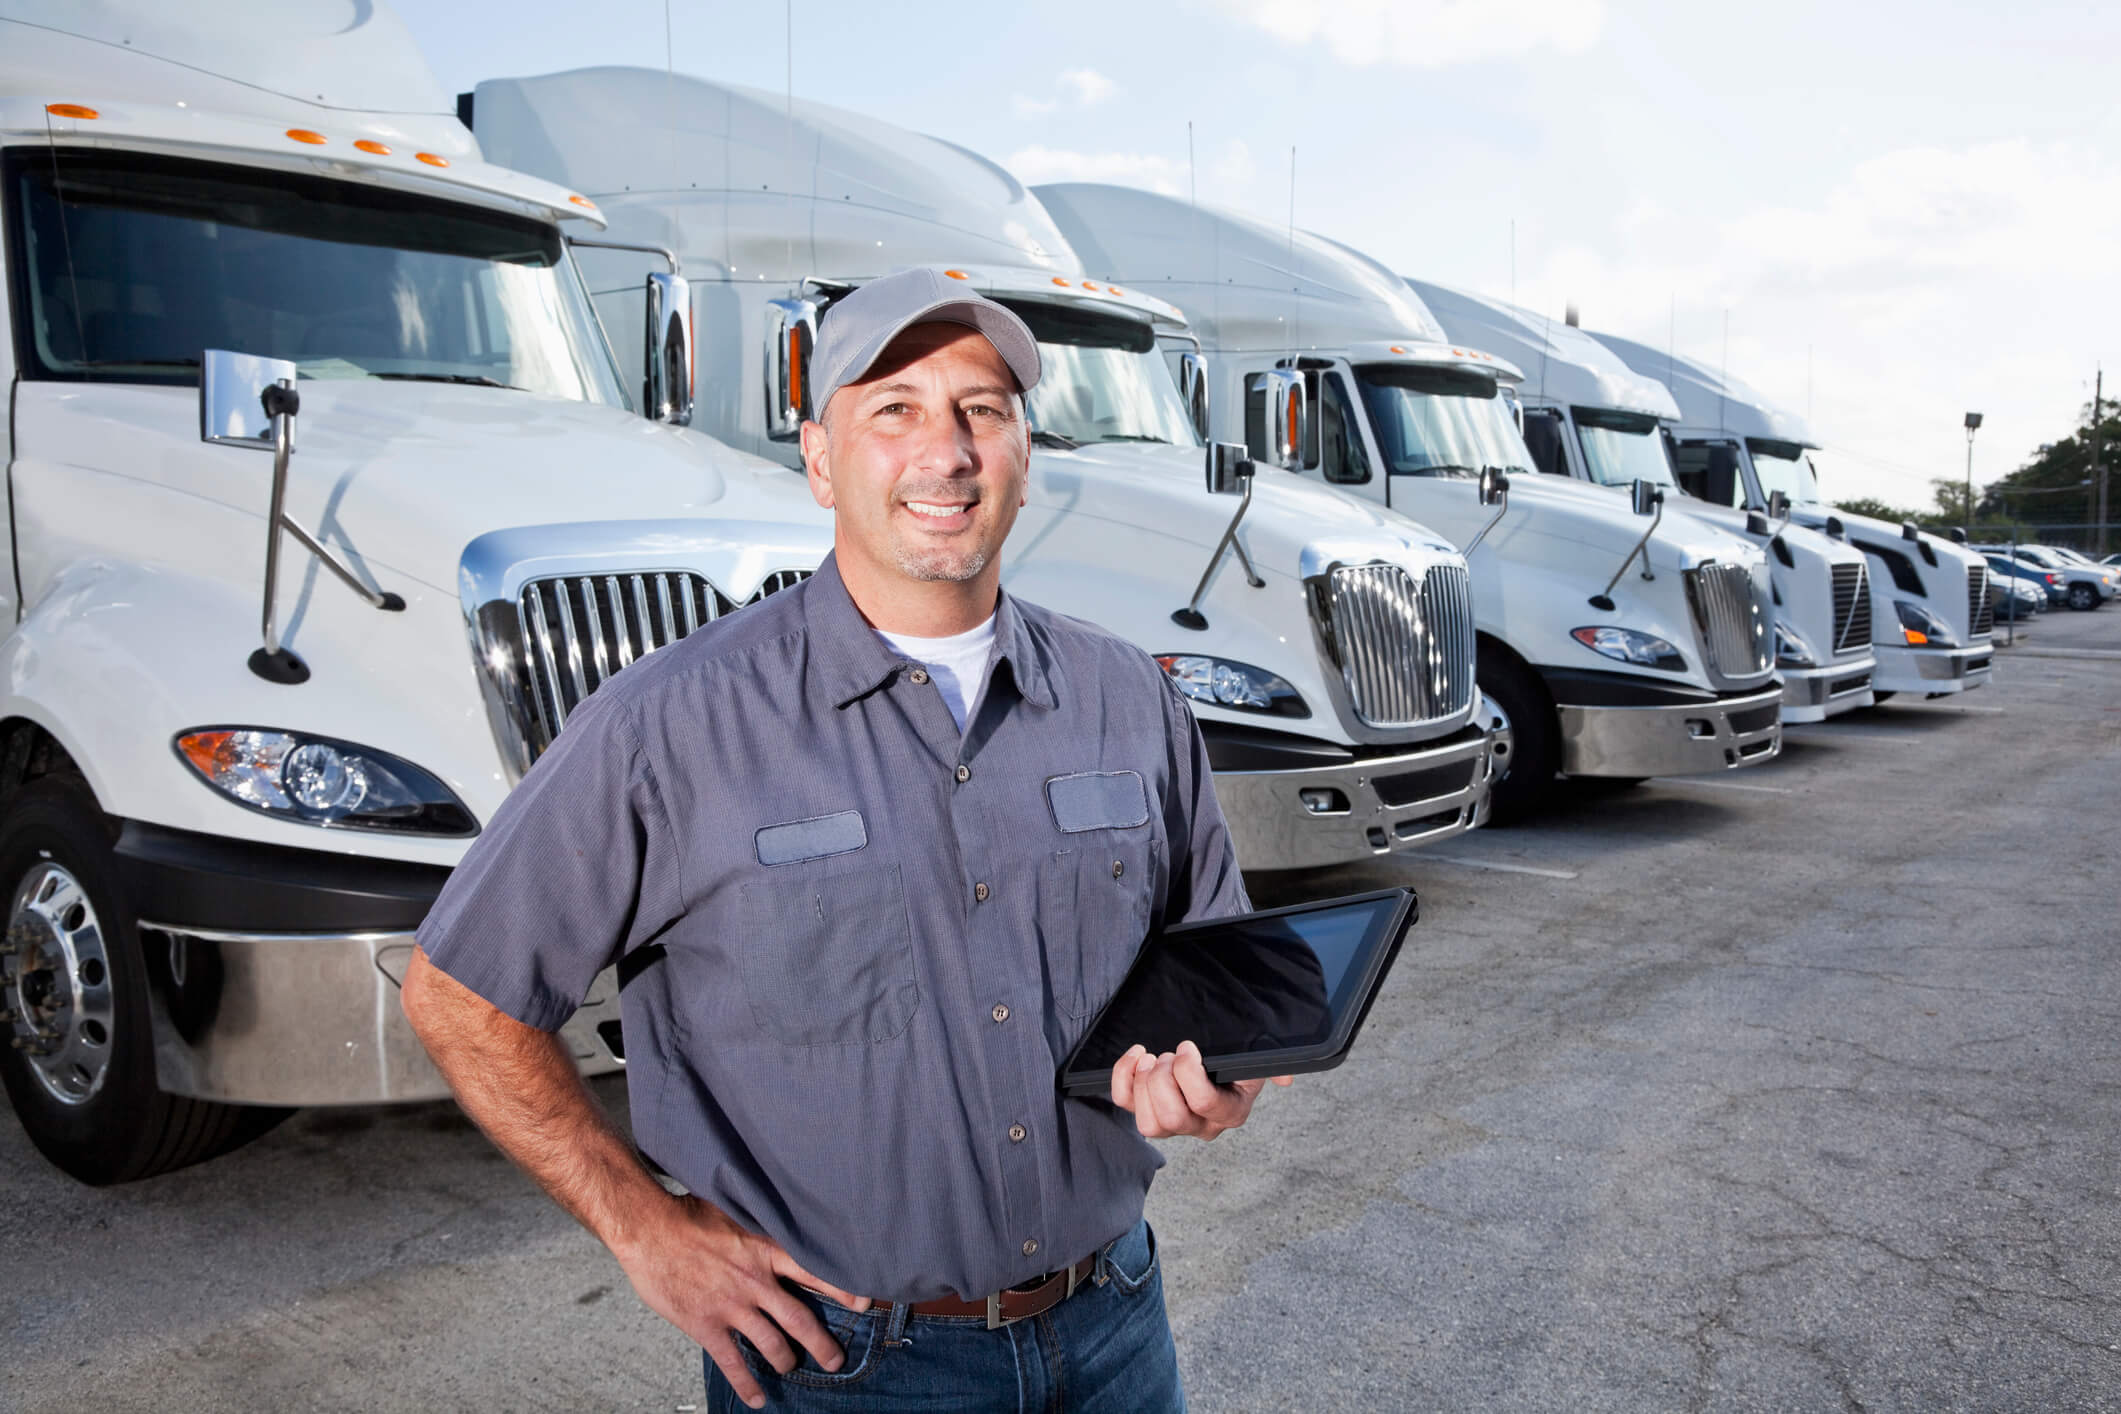 A truck driver is standing in a large parking lot in front of several large trucks. He is facing the camera, and he is wearing a short-sleeved blue shirt, blue jeans, a brown belt and a gray hat. He is holding a black tablet with his left hand. There are six big rigs seen lined up behind him, going from left to right. The large trucks all look the same, being all white and having silver grills and mirrors. There are multiple cars seen parked to the right of the trucks. A cloudy blue sky is seen in the background.